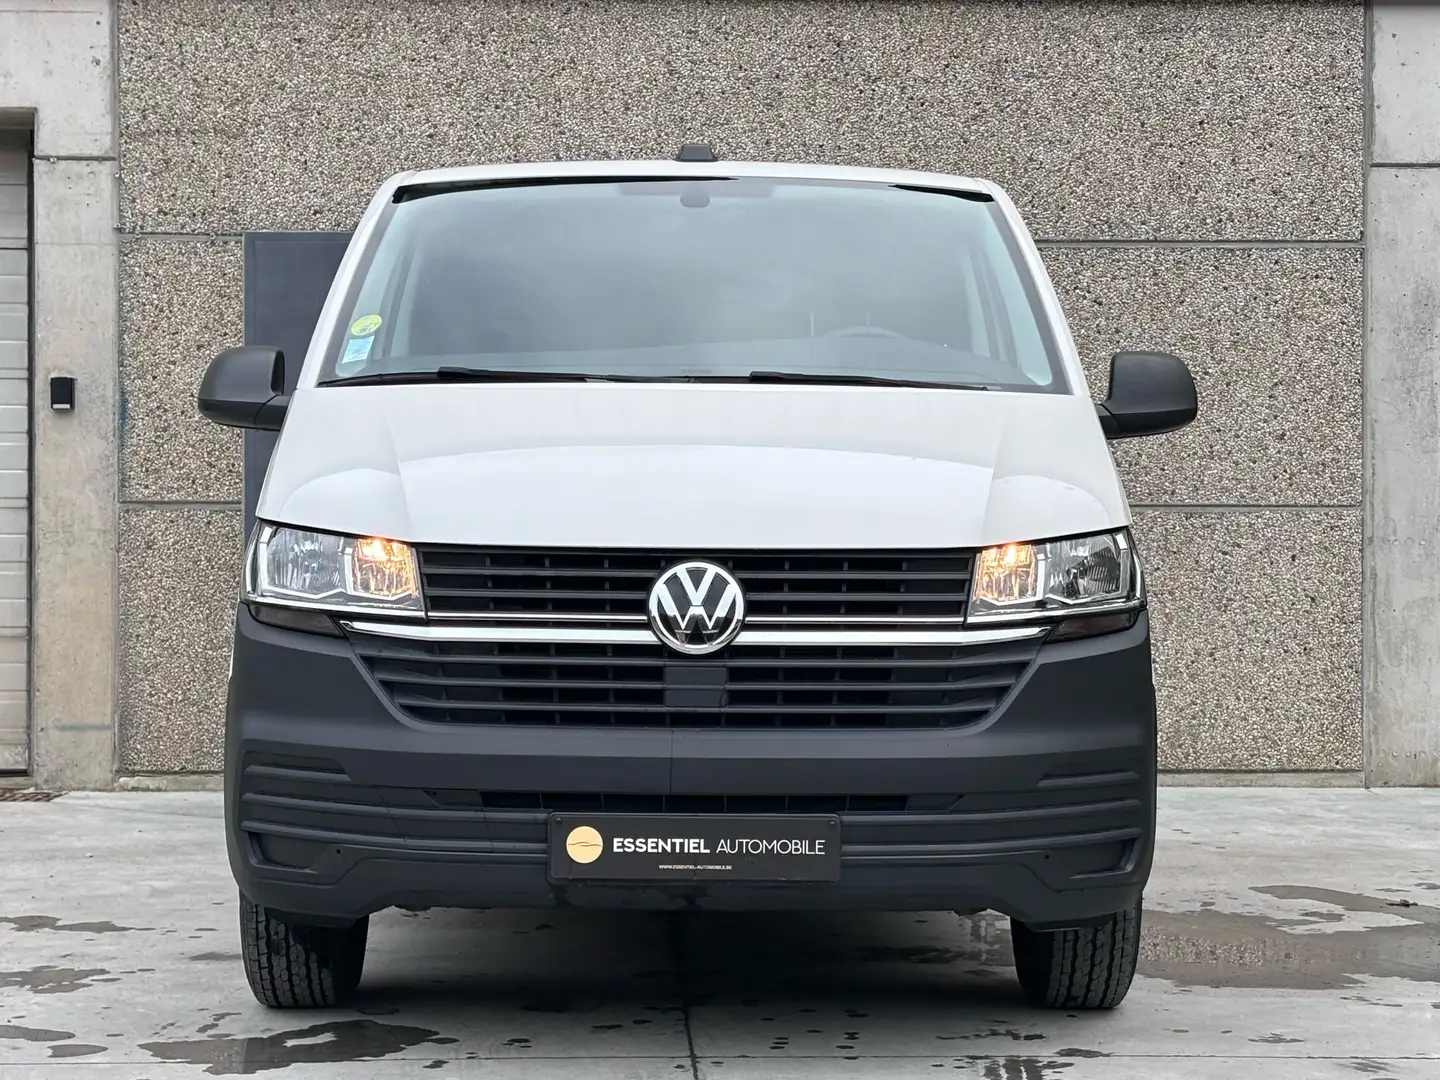 Volkswagen T6.1 Transporter 2.0 TDi 3 places - Uilitaire - TVA déductible Wit - 2